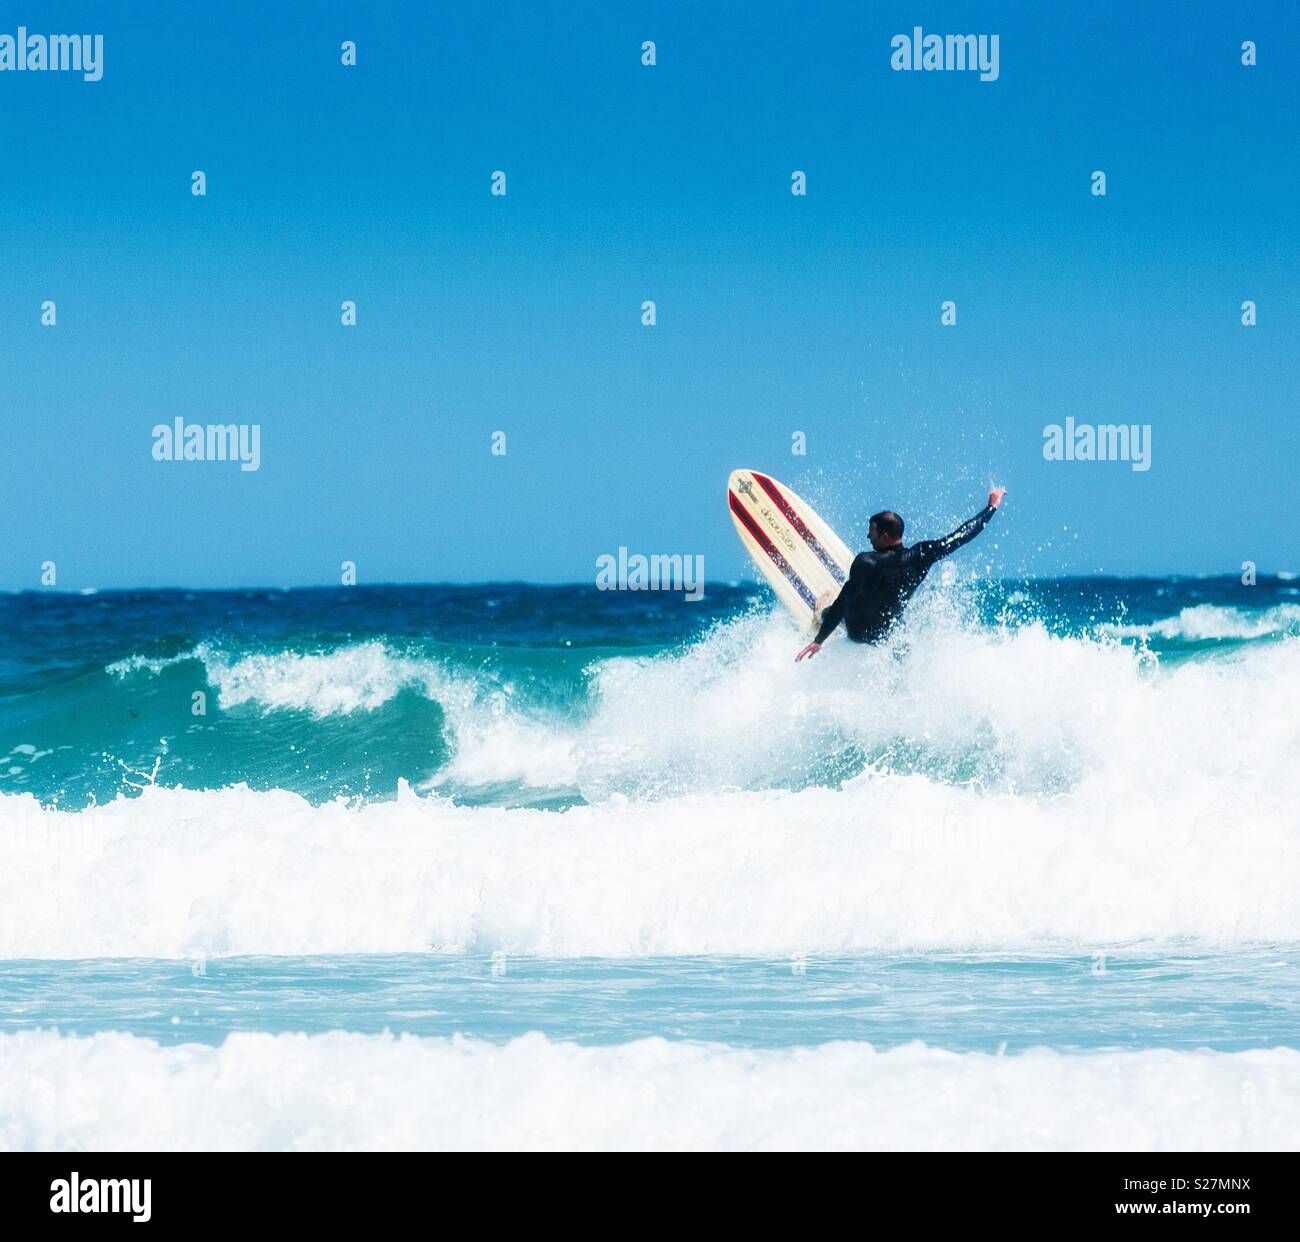 A surfer riding a big wave before a wipeout Stock Photo